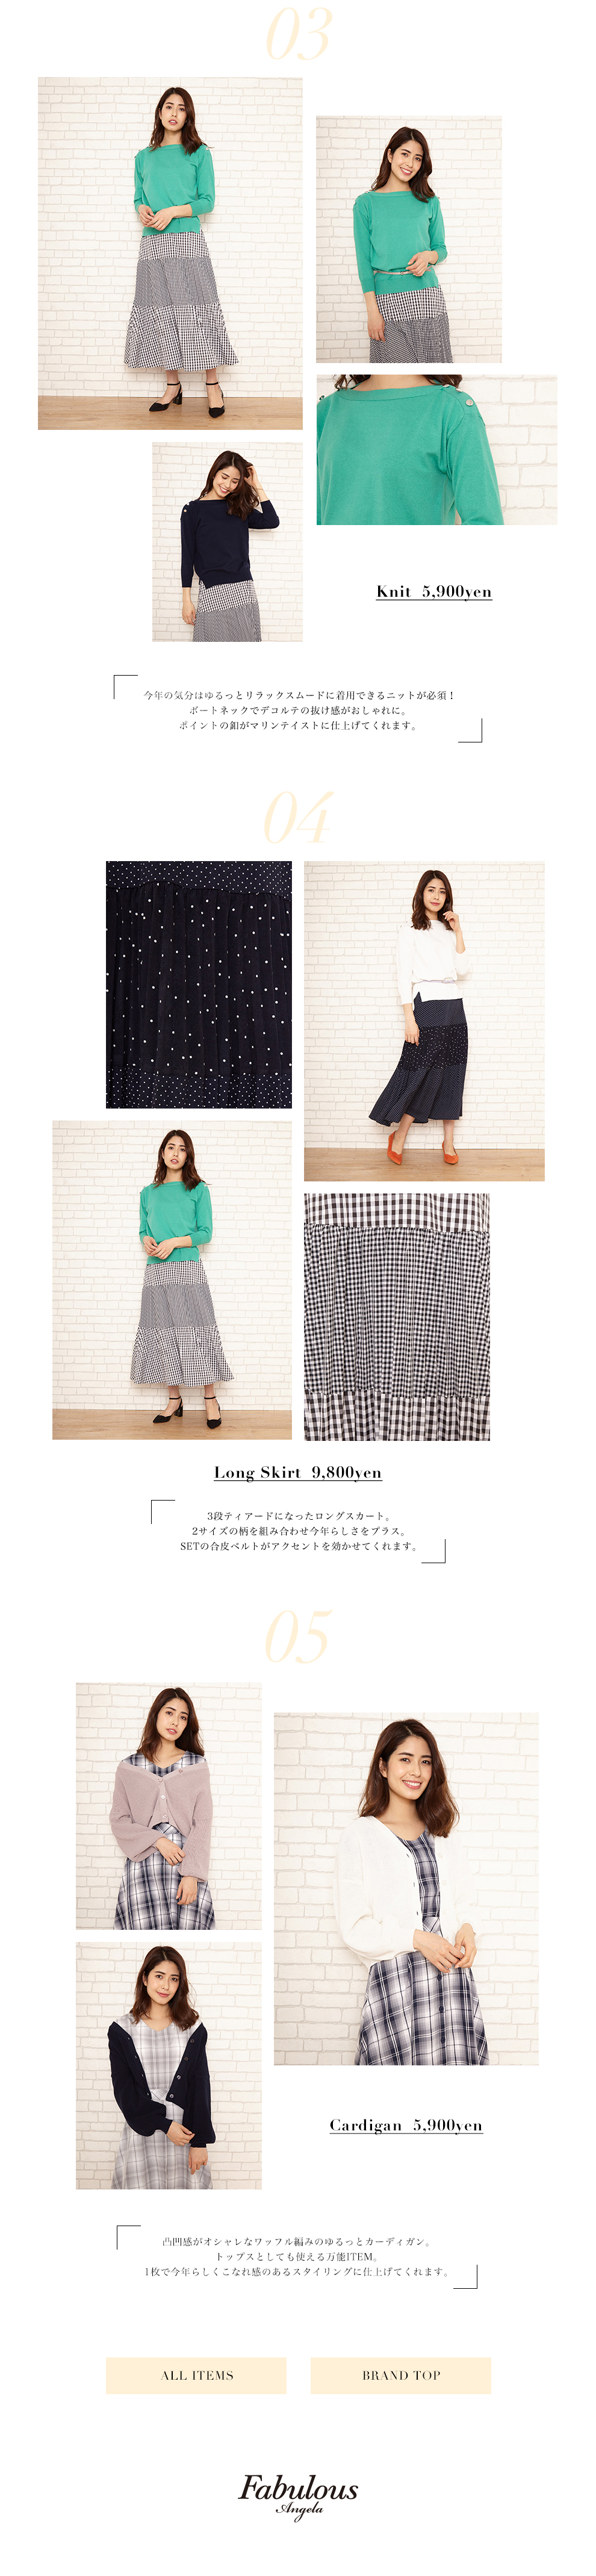 2019 Spring Recommended Item